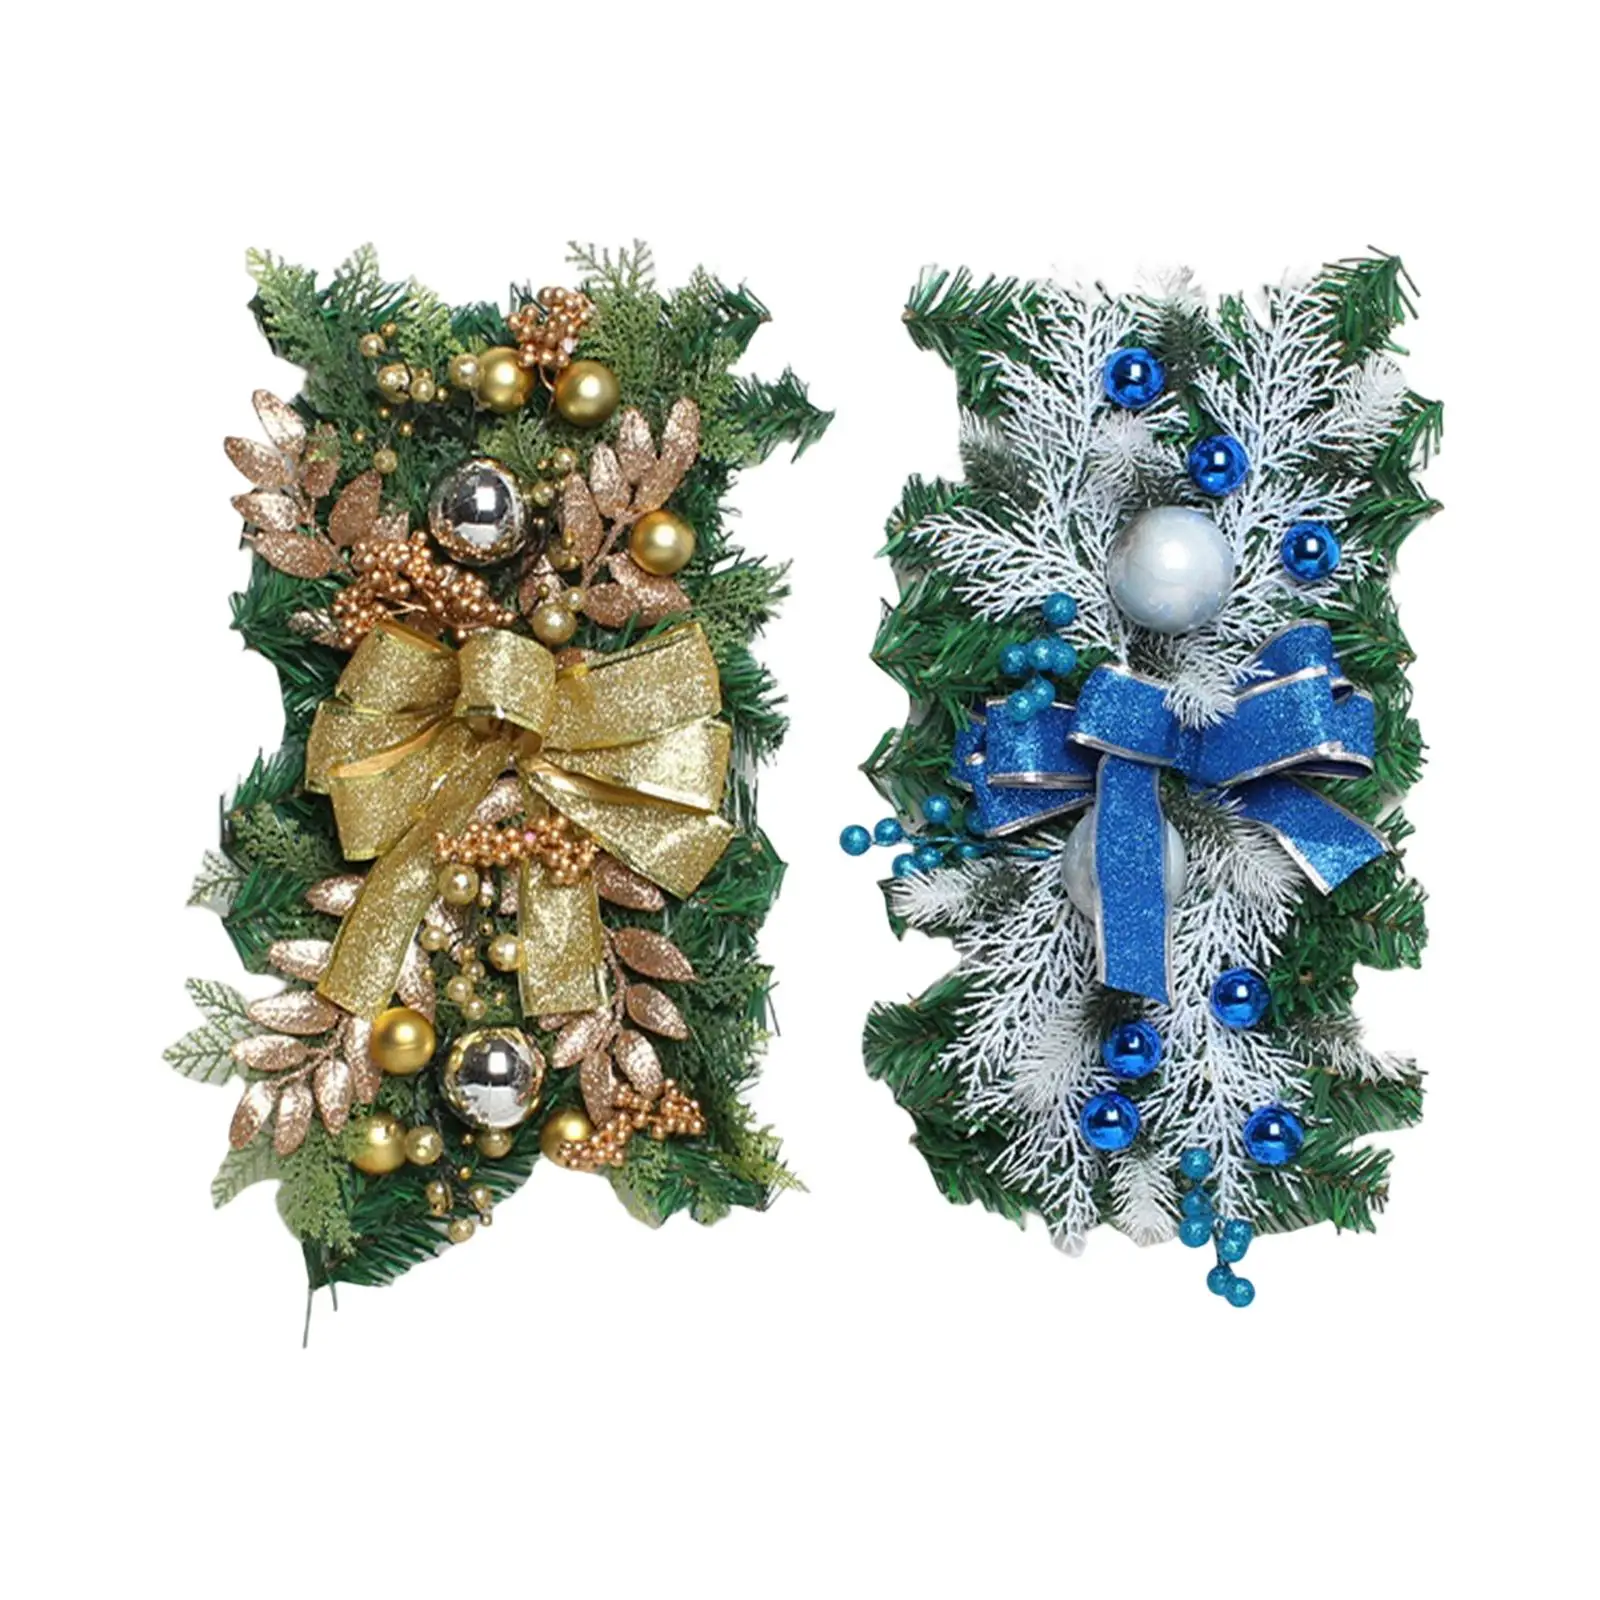 Artificial Christmas Stair Swag Wreath Gold Garland Ornaments for Decor Staircase Party Railing Fireplace